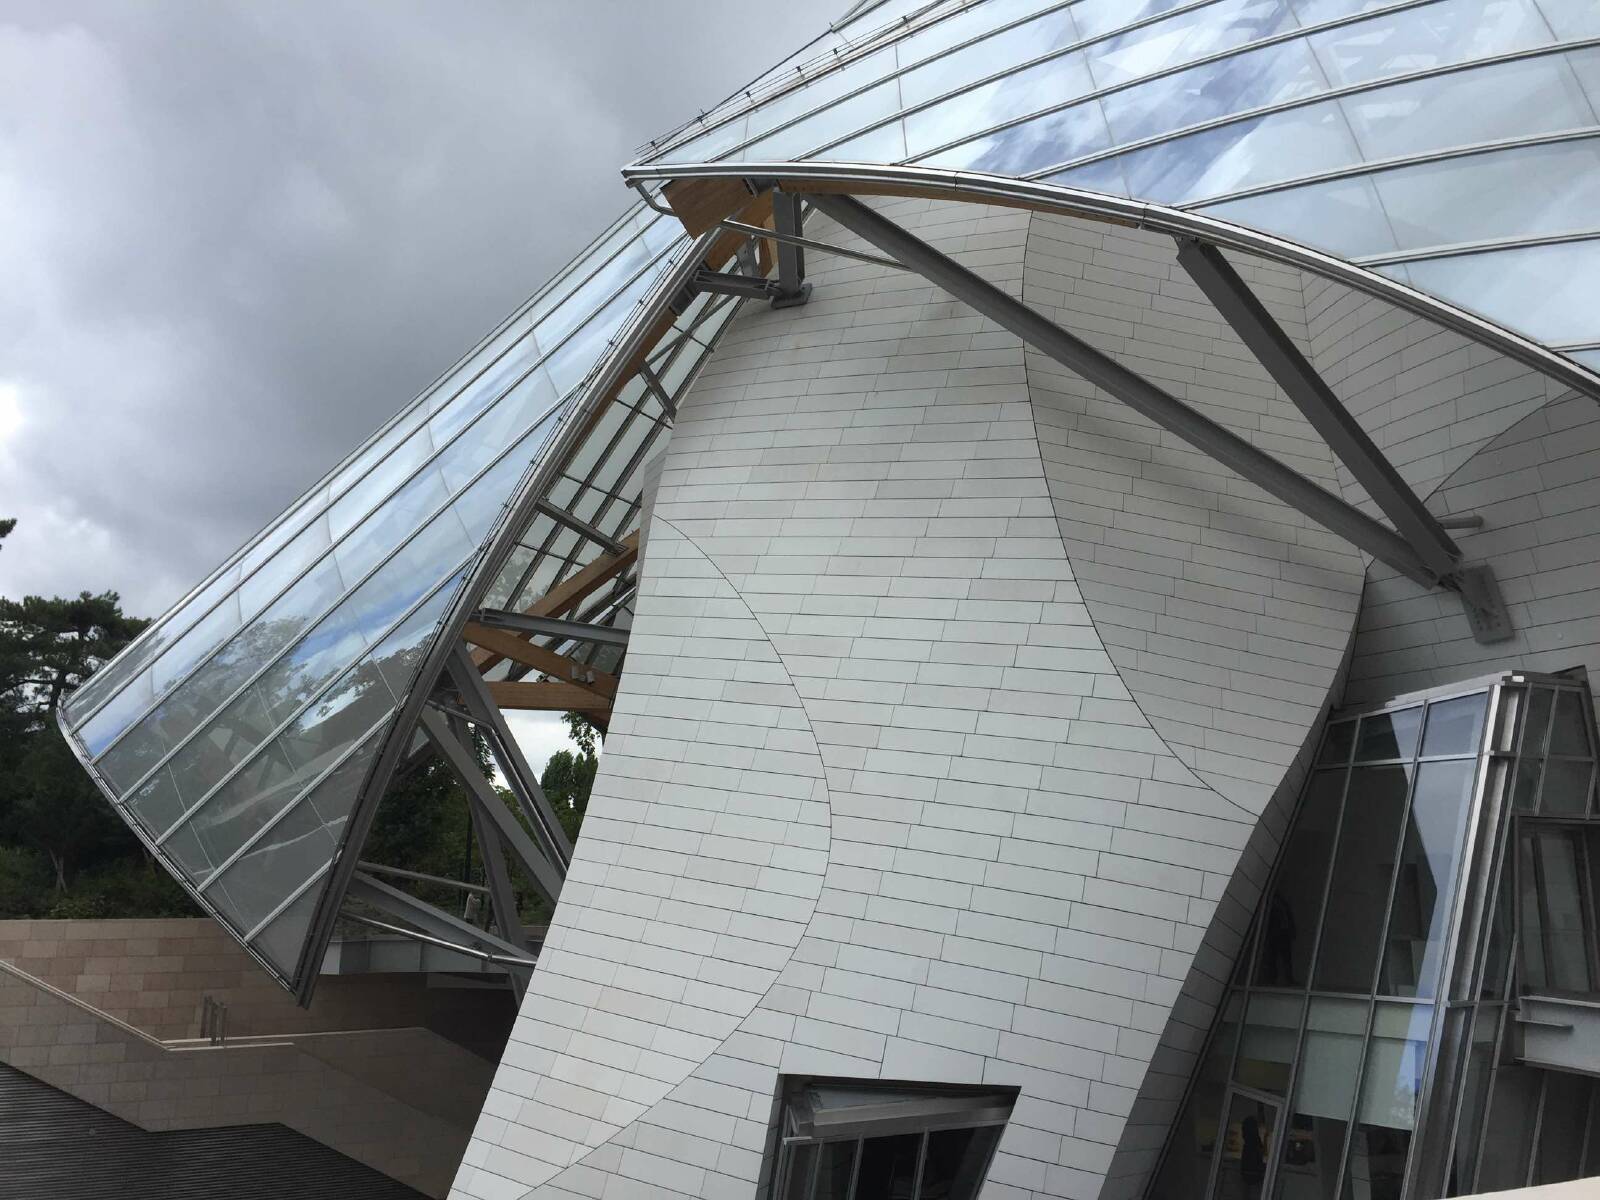 Fondation Louis Vuitton - Compare Ticket Prices from Different